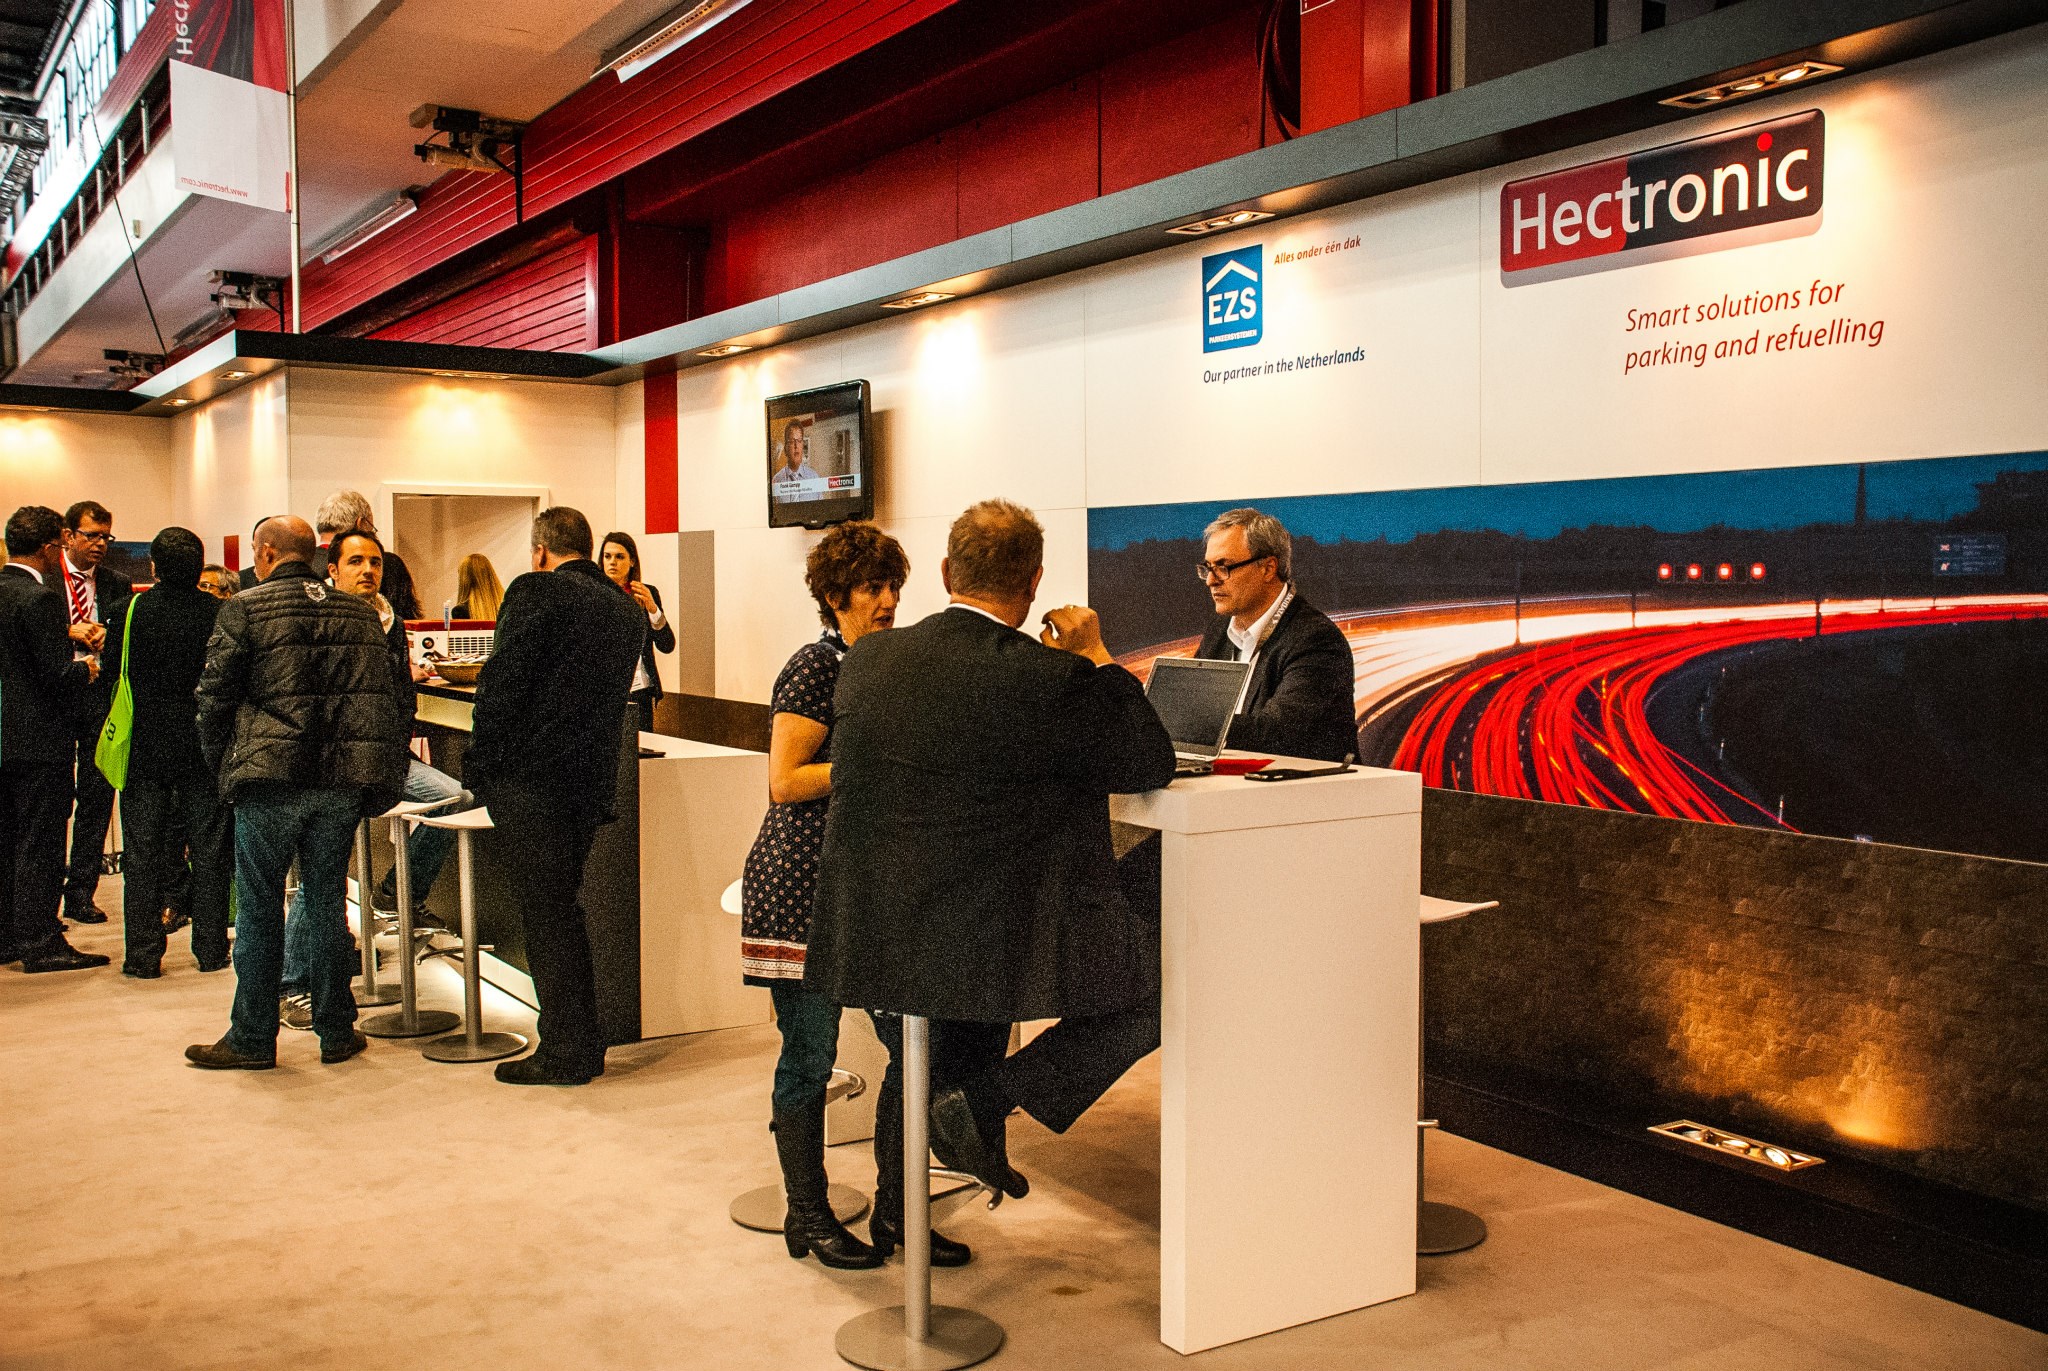 Hectronic at Intertraffic 2012